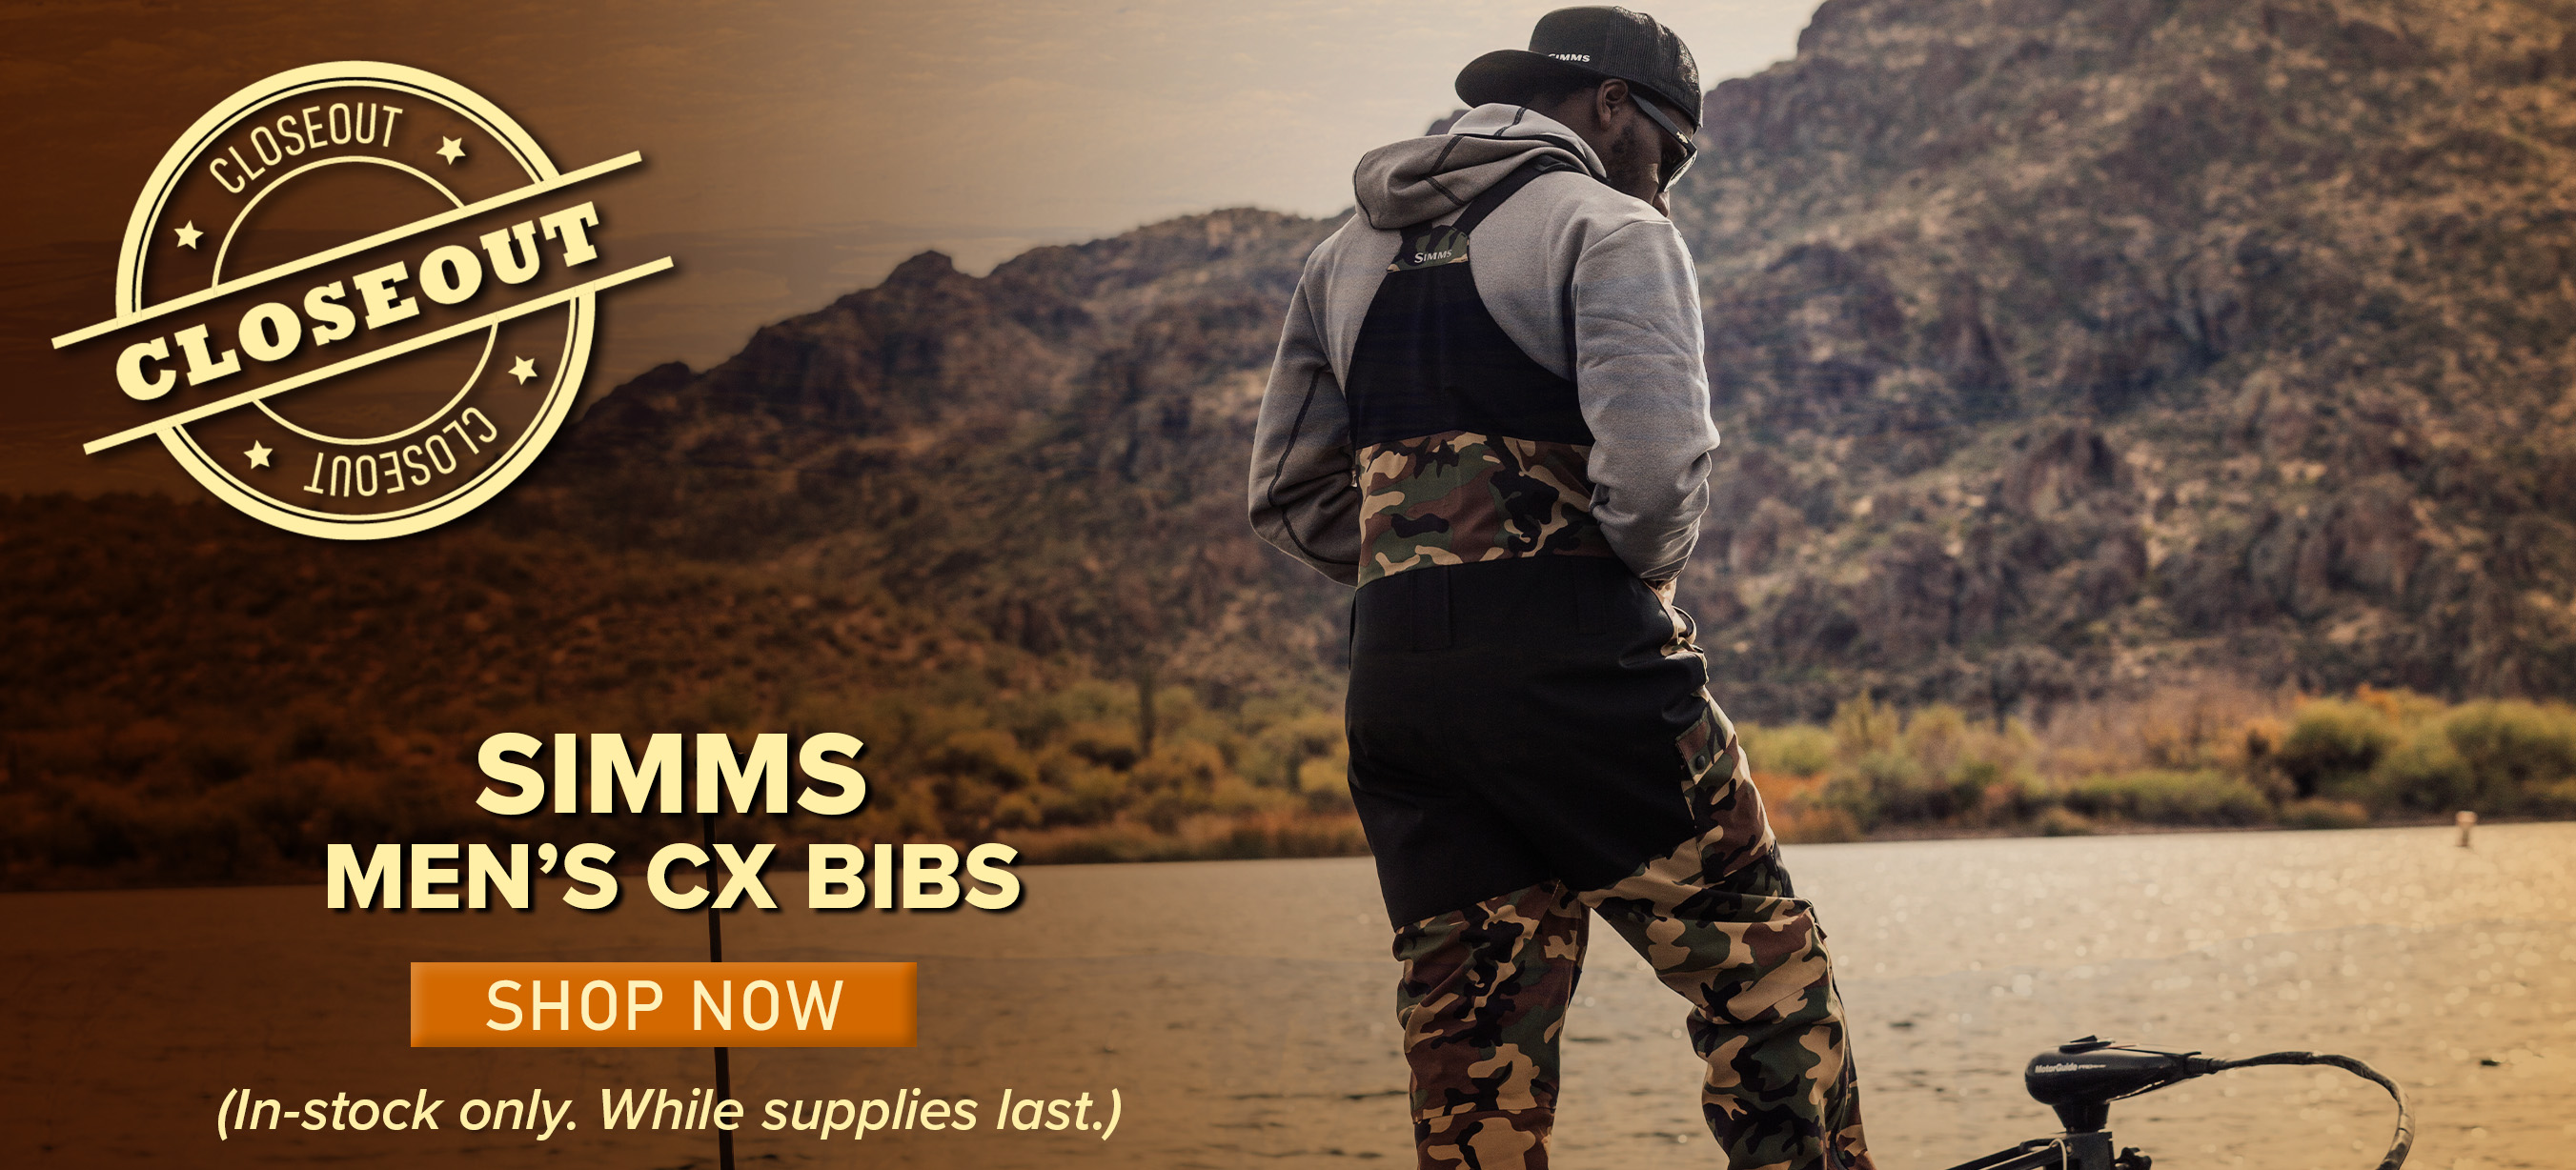 Closeout Simms Men's CX Bibs Shop Now (In-stock only. While supplies last.)